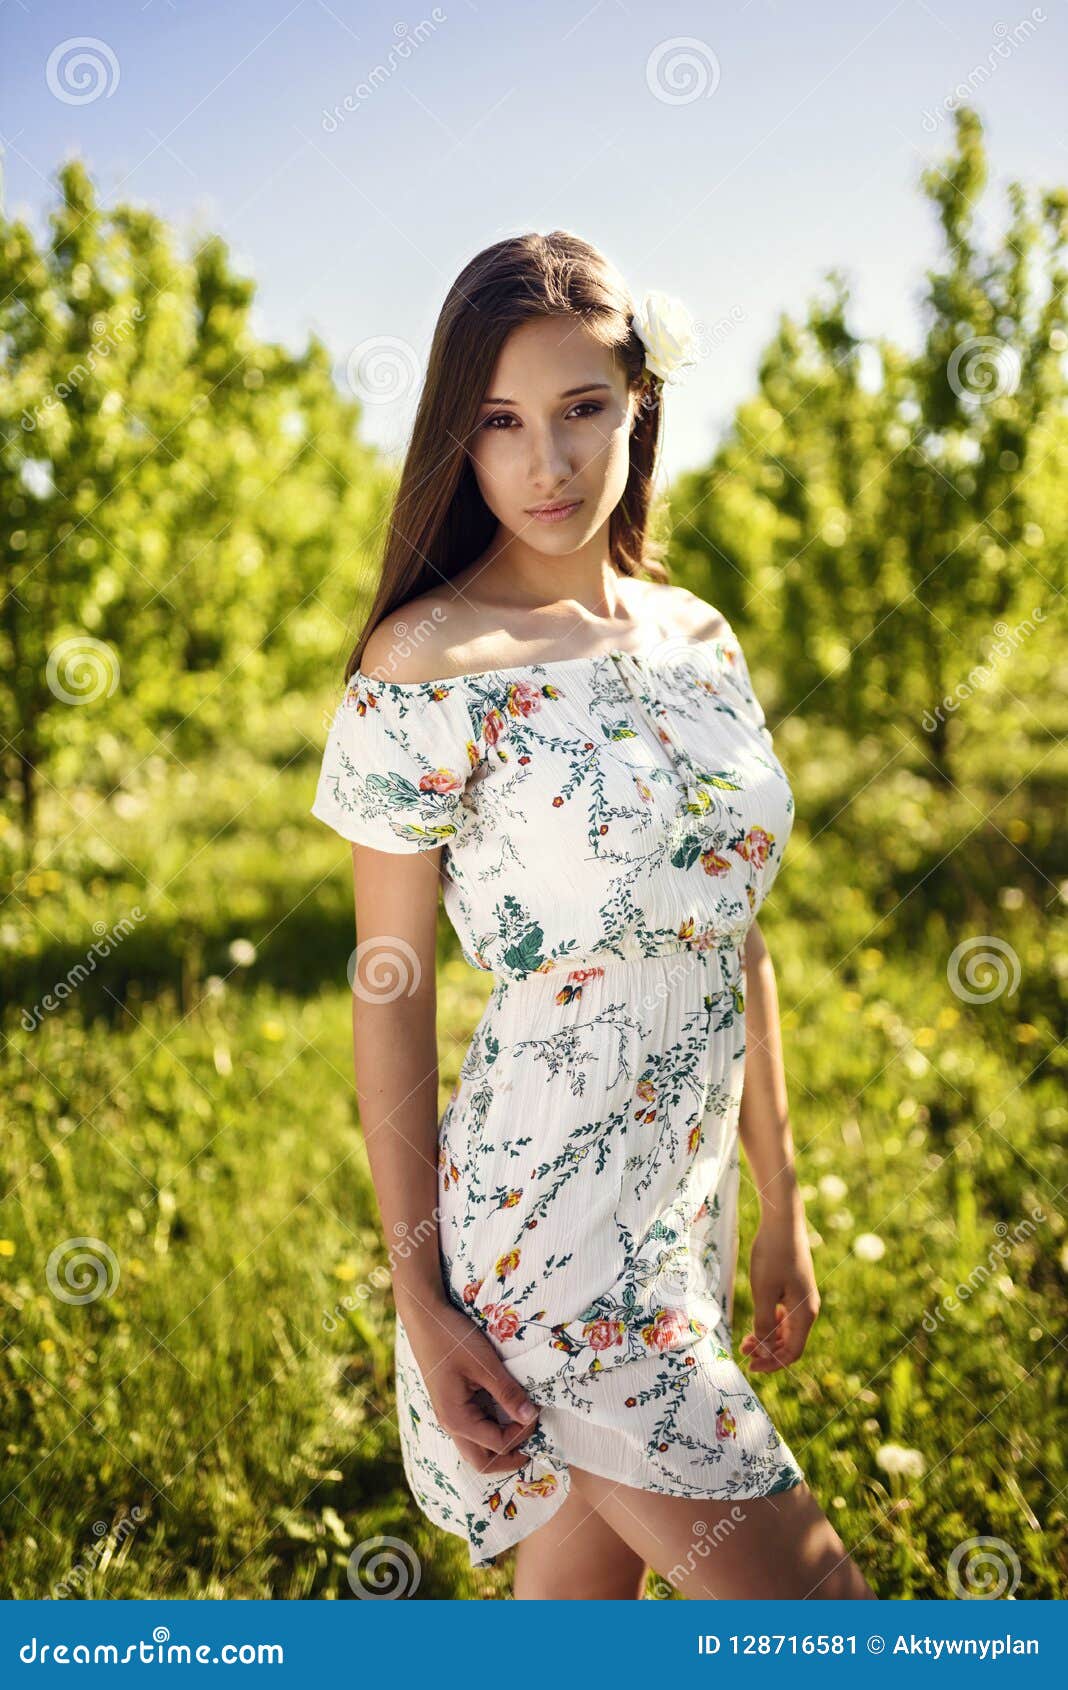 Beautiful Girl in the Orchard. Stock Image - Image of dress, harvest ...